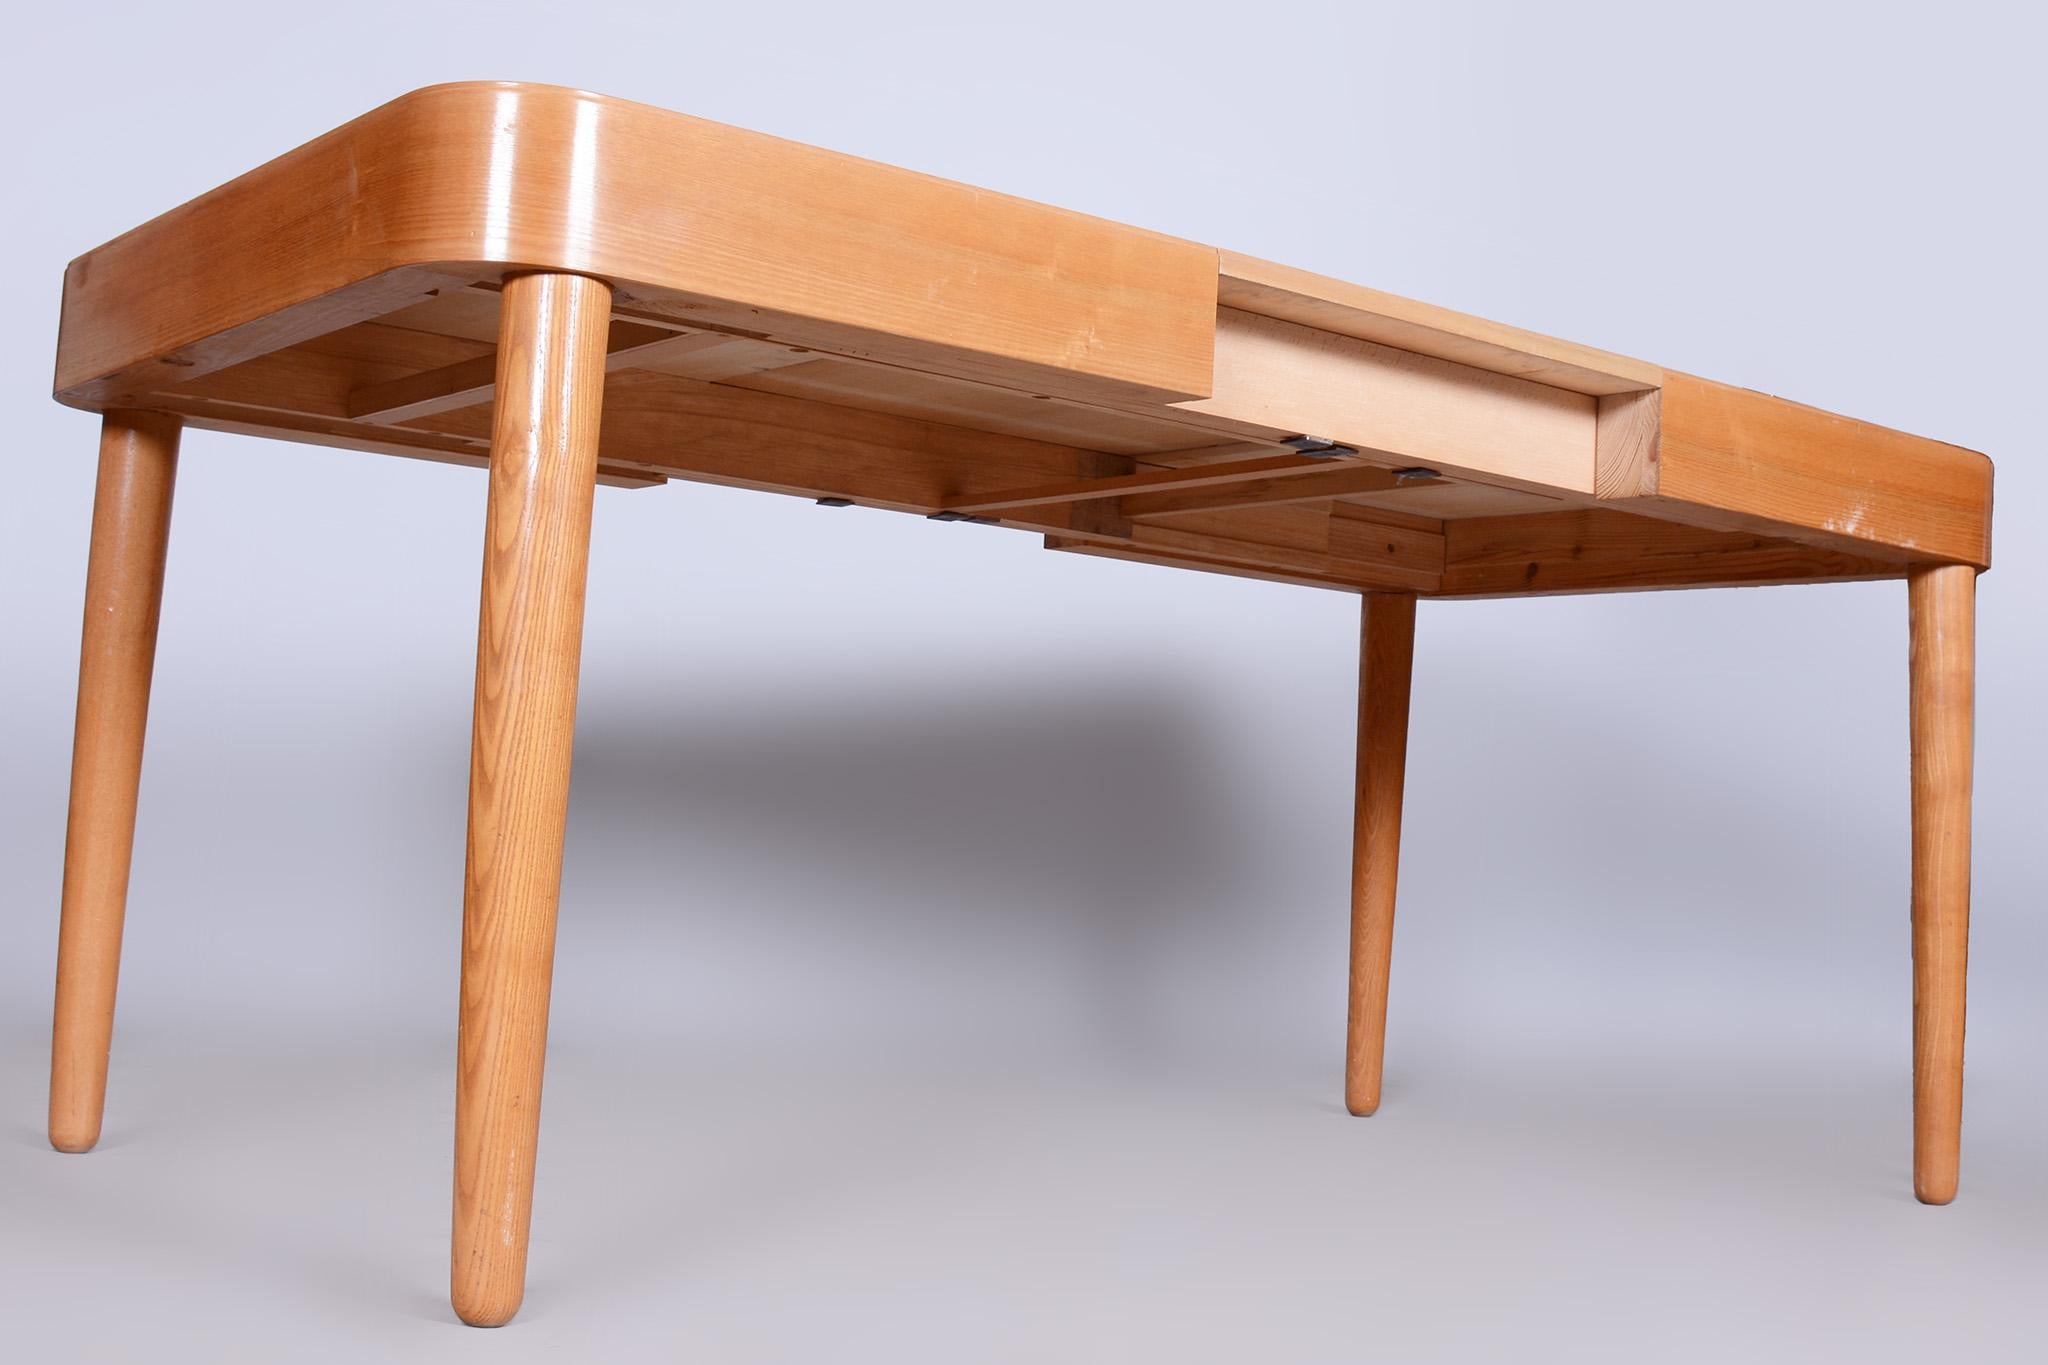 Midcentury Ash Dining Table, Made by Uluv, Revived Polish, Czechia, 1950s For Sale 3